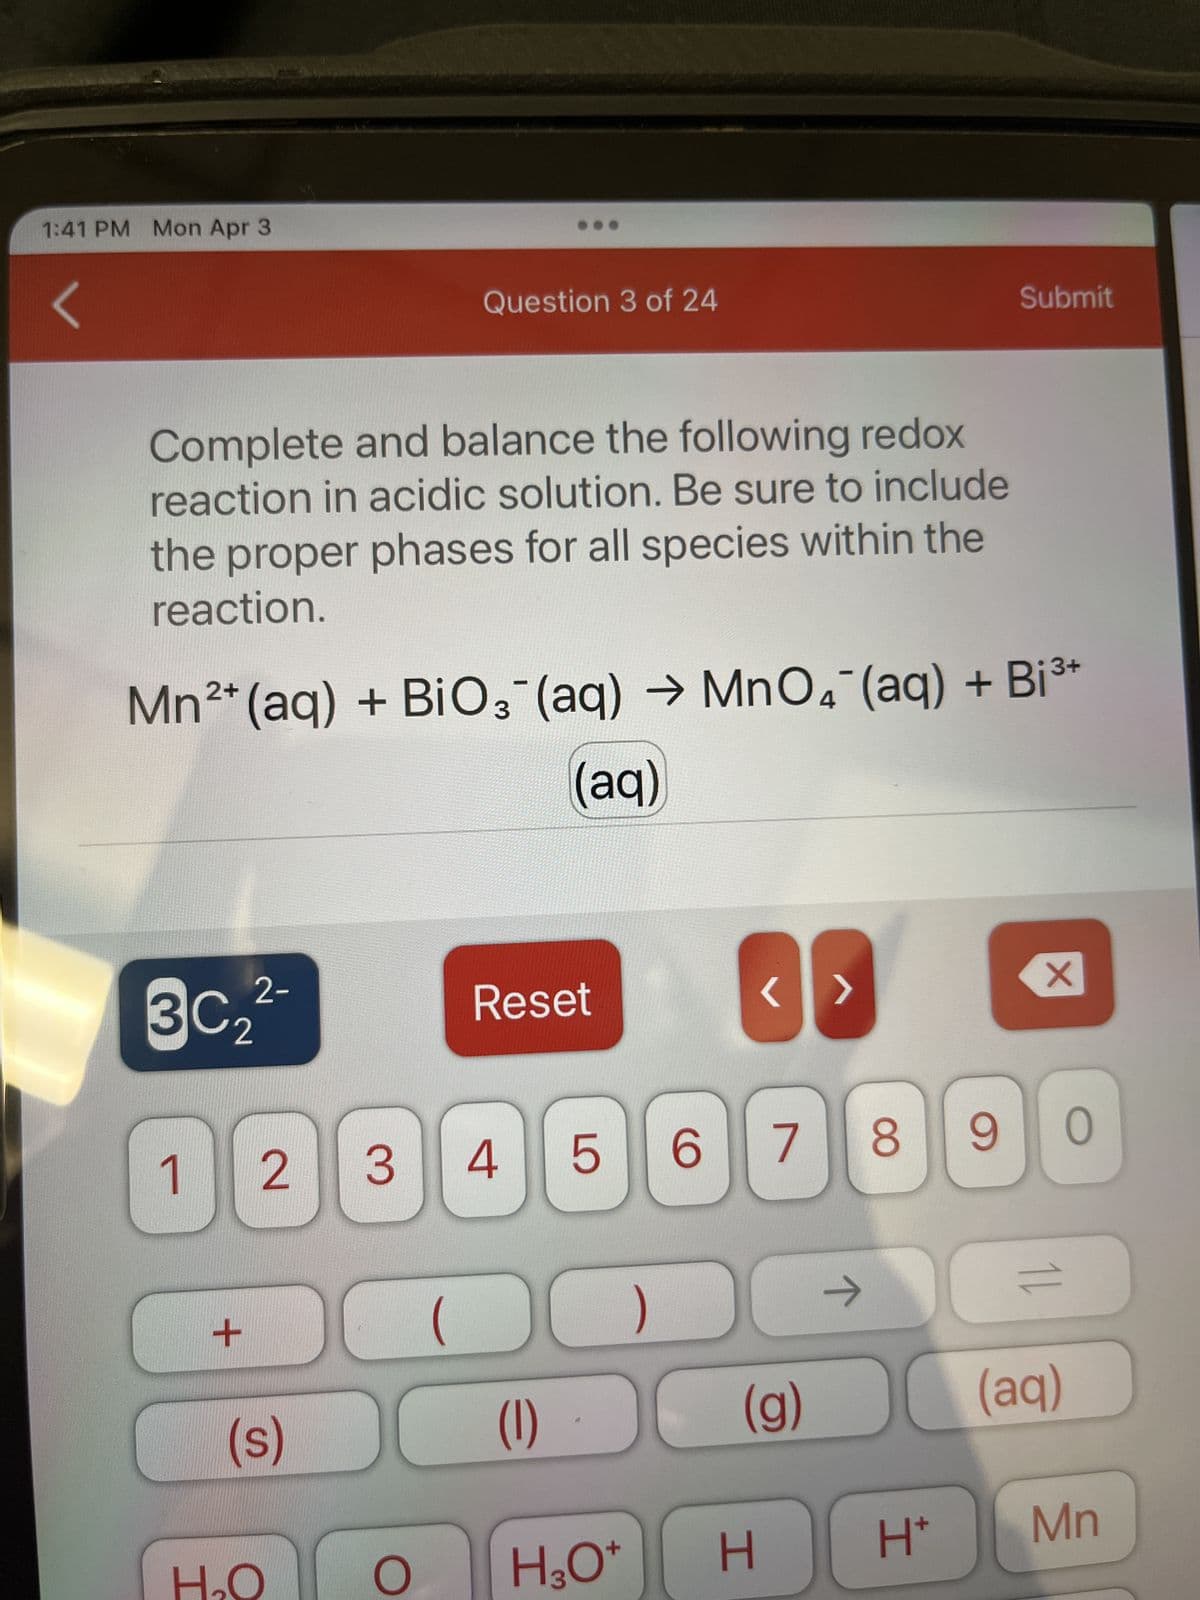 1:41 PM Mon Apr 3
Complete and balance the following redox
reaction in acidic solution. Be sure to include
the proper phases for all species within the
reaction.
2+
Mn²+ (aq) + BiO3(aq) →MnO4 (aq) + Bi³+
(aq)
3C₂
1)[
2-
+
Question 3 of 24
(s)
H₂O
3 4
2
(
Reset
(1)
<>
8
507 90
(g)
Submit
ㅈ
H
H3O+
O
X
=
(aq)
H* Mn